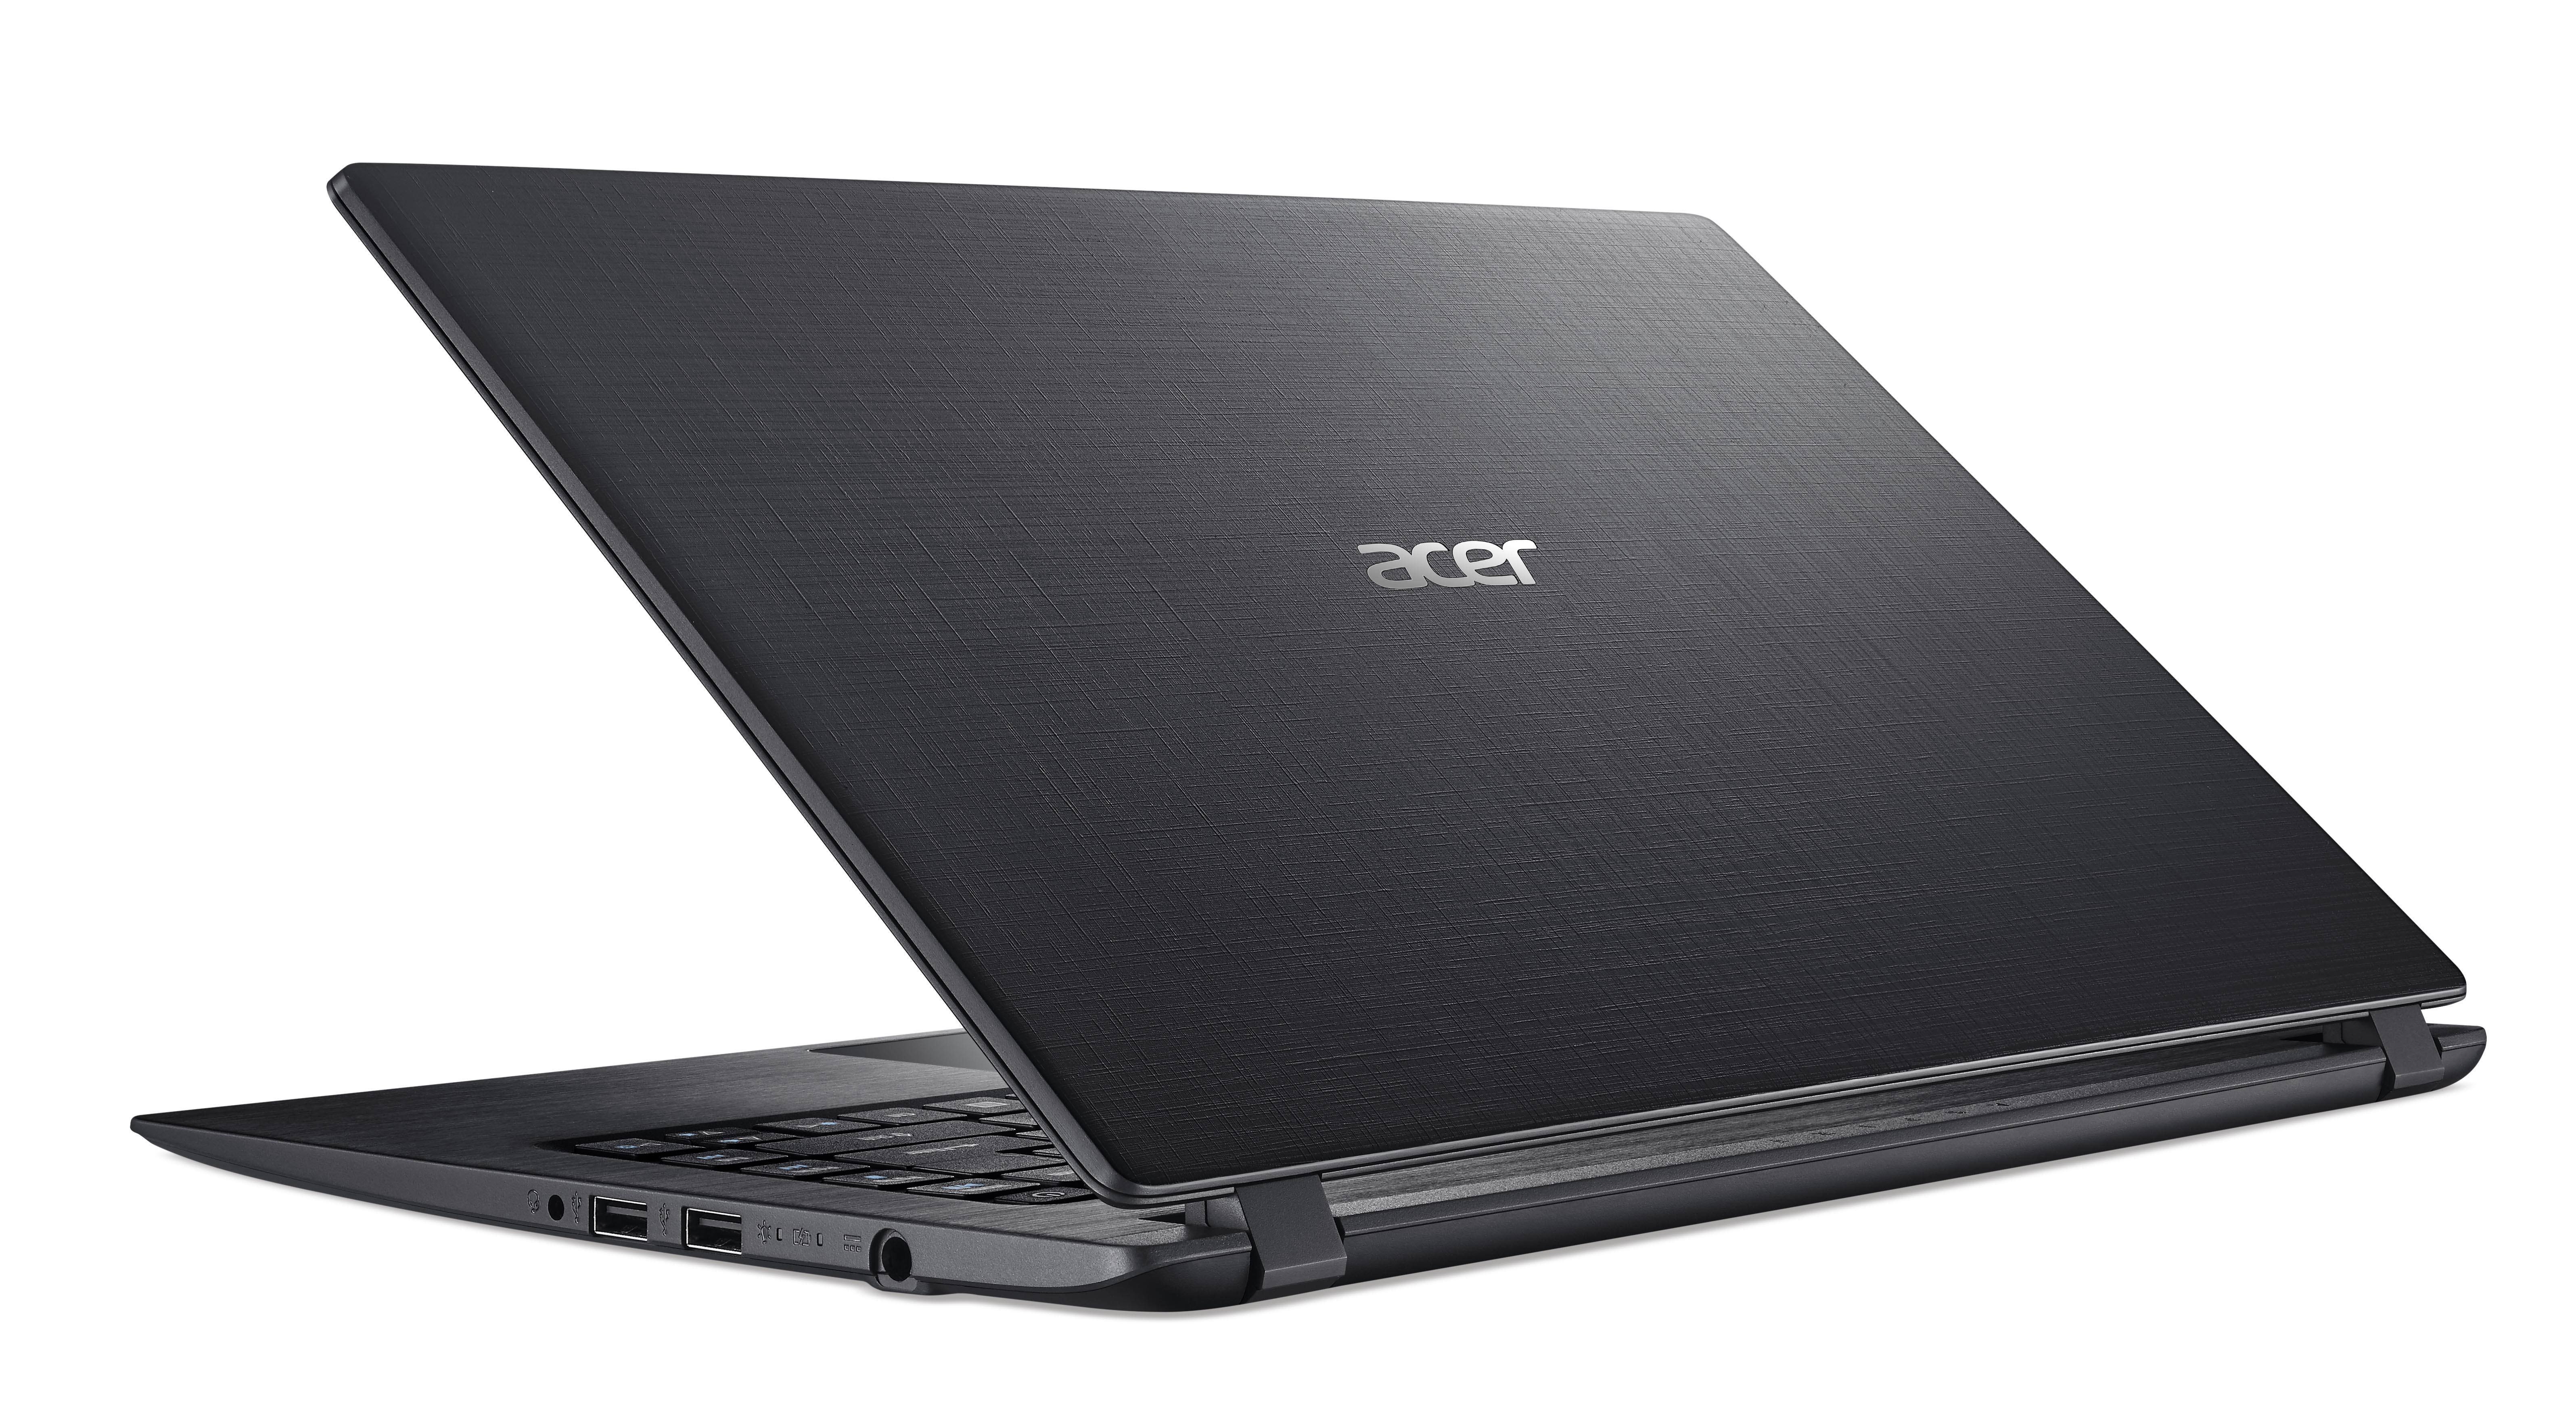 The Acer Aspire 1 with Windows 10